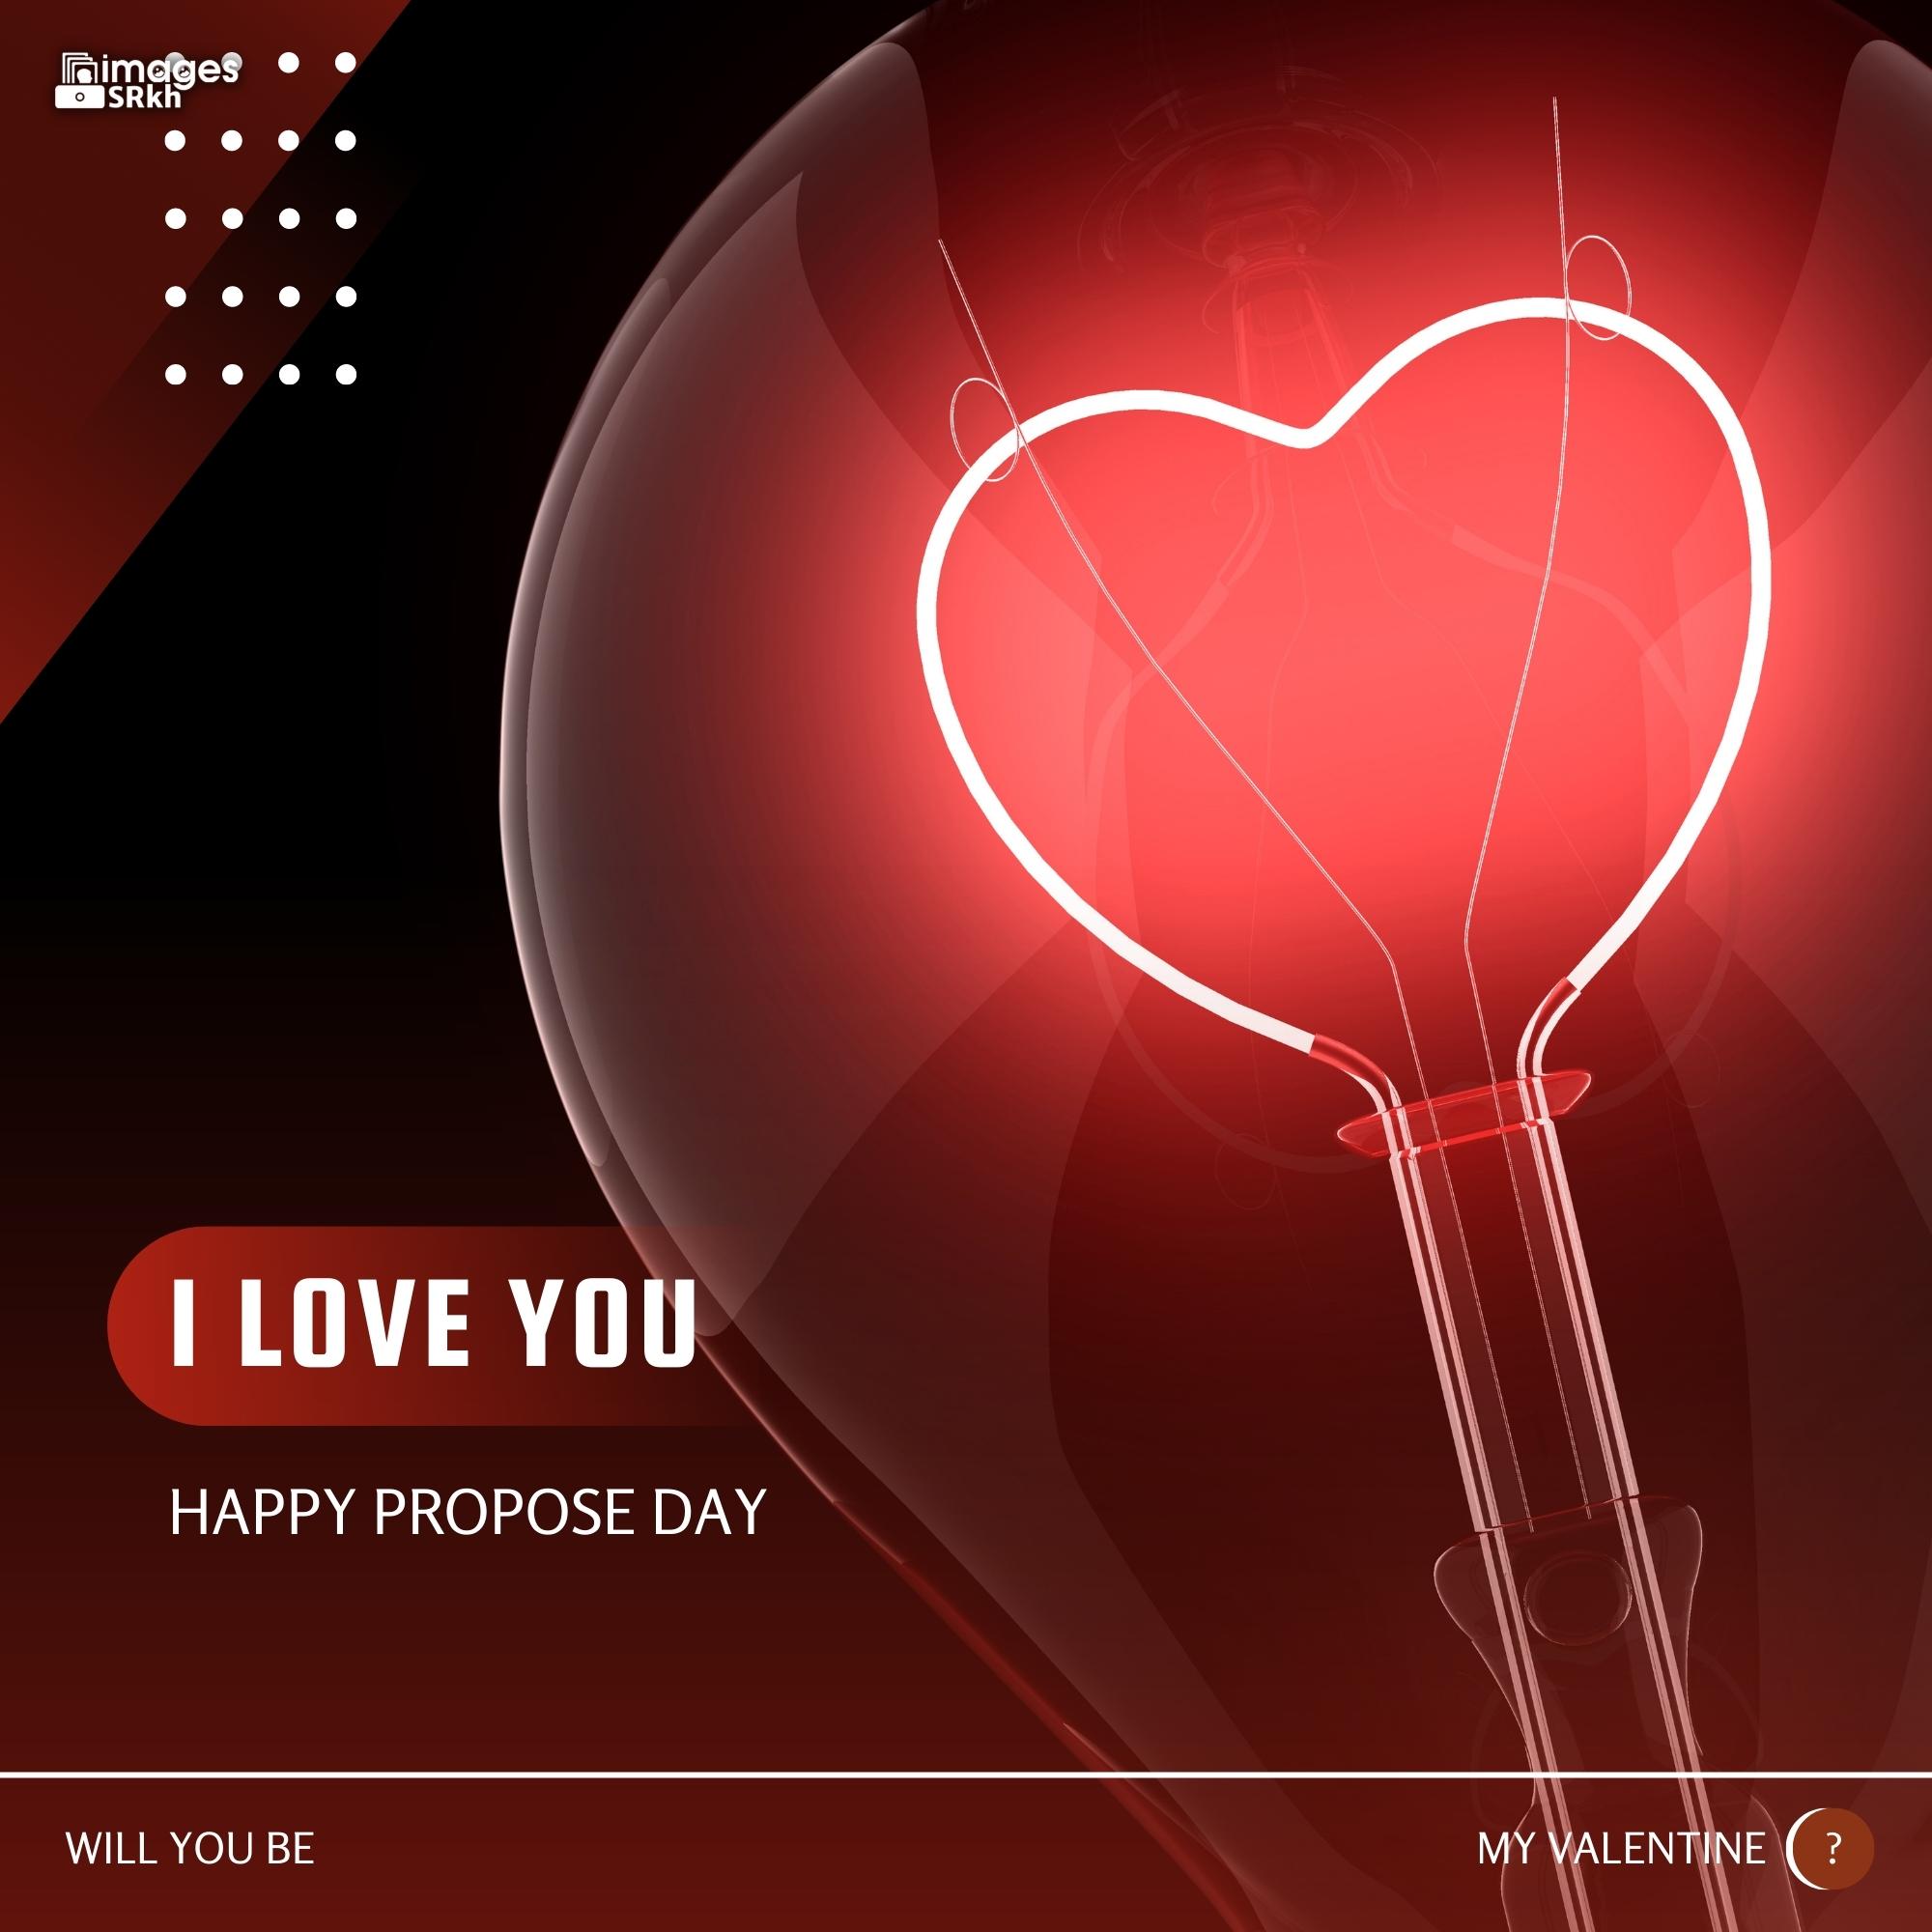 Happy Propose Day Images | 446 | I love you will you be my valentine